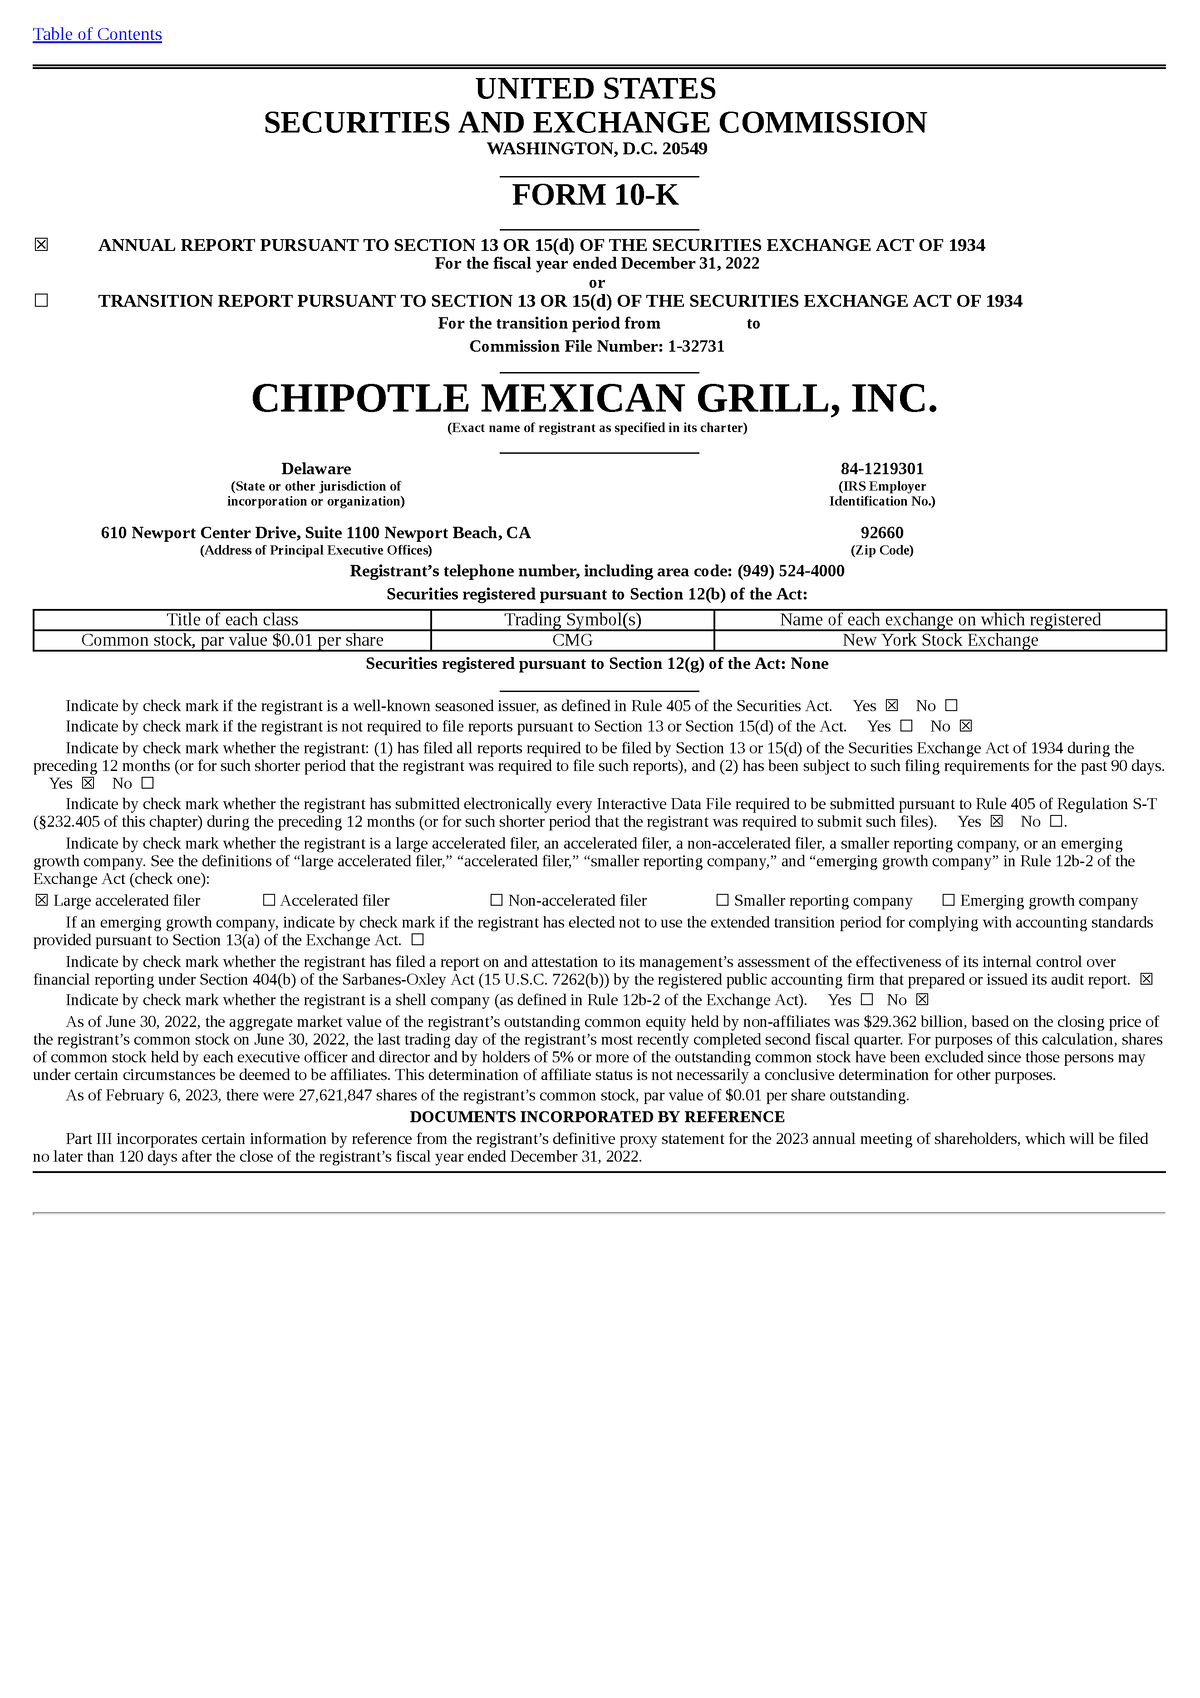 Chipotle 10K 10K form for financial reporting UNITED STATES